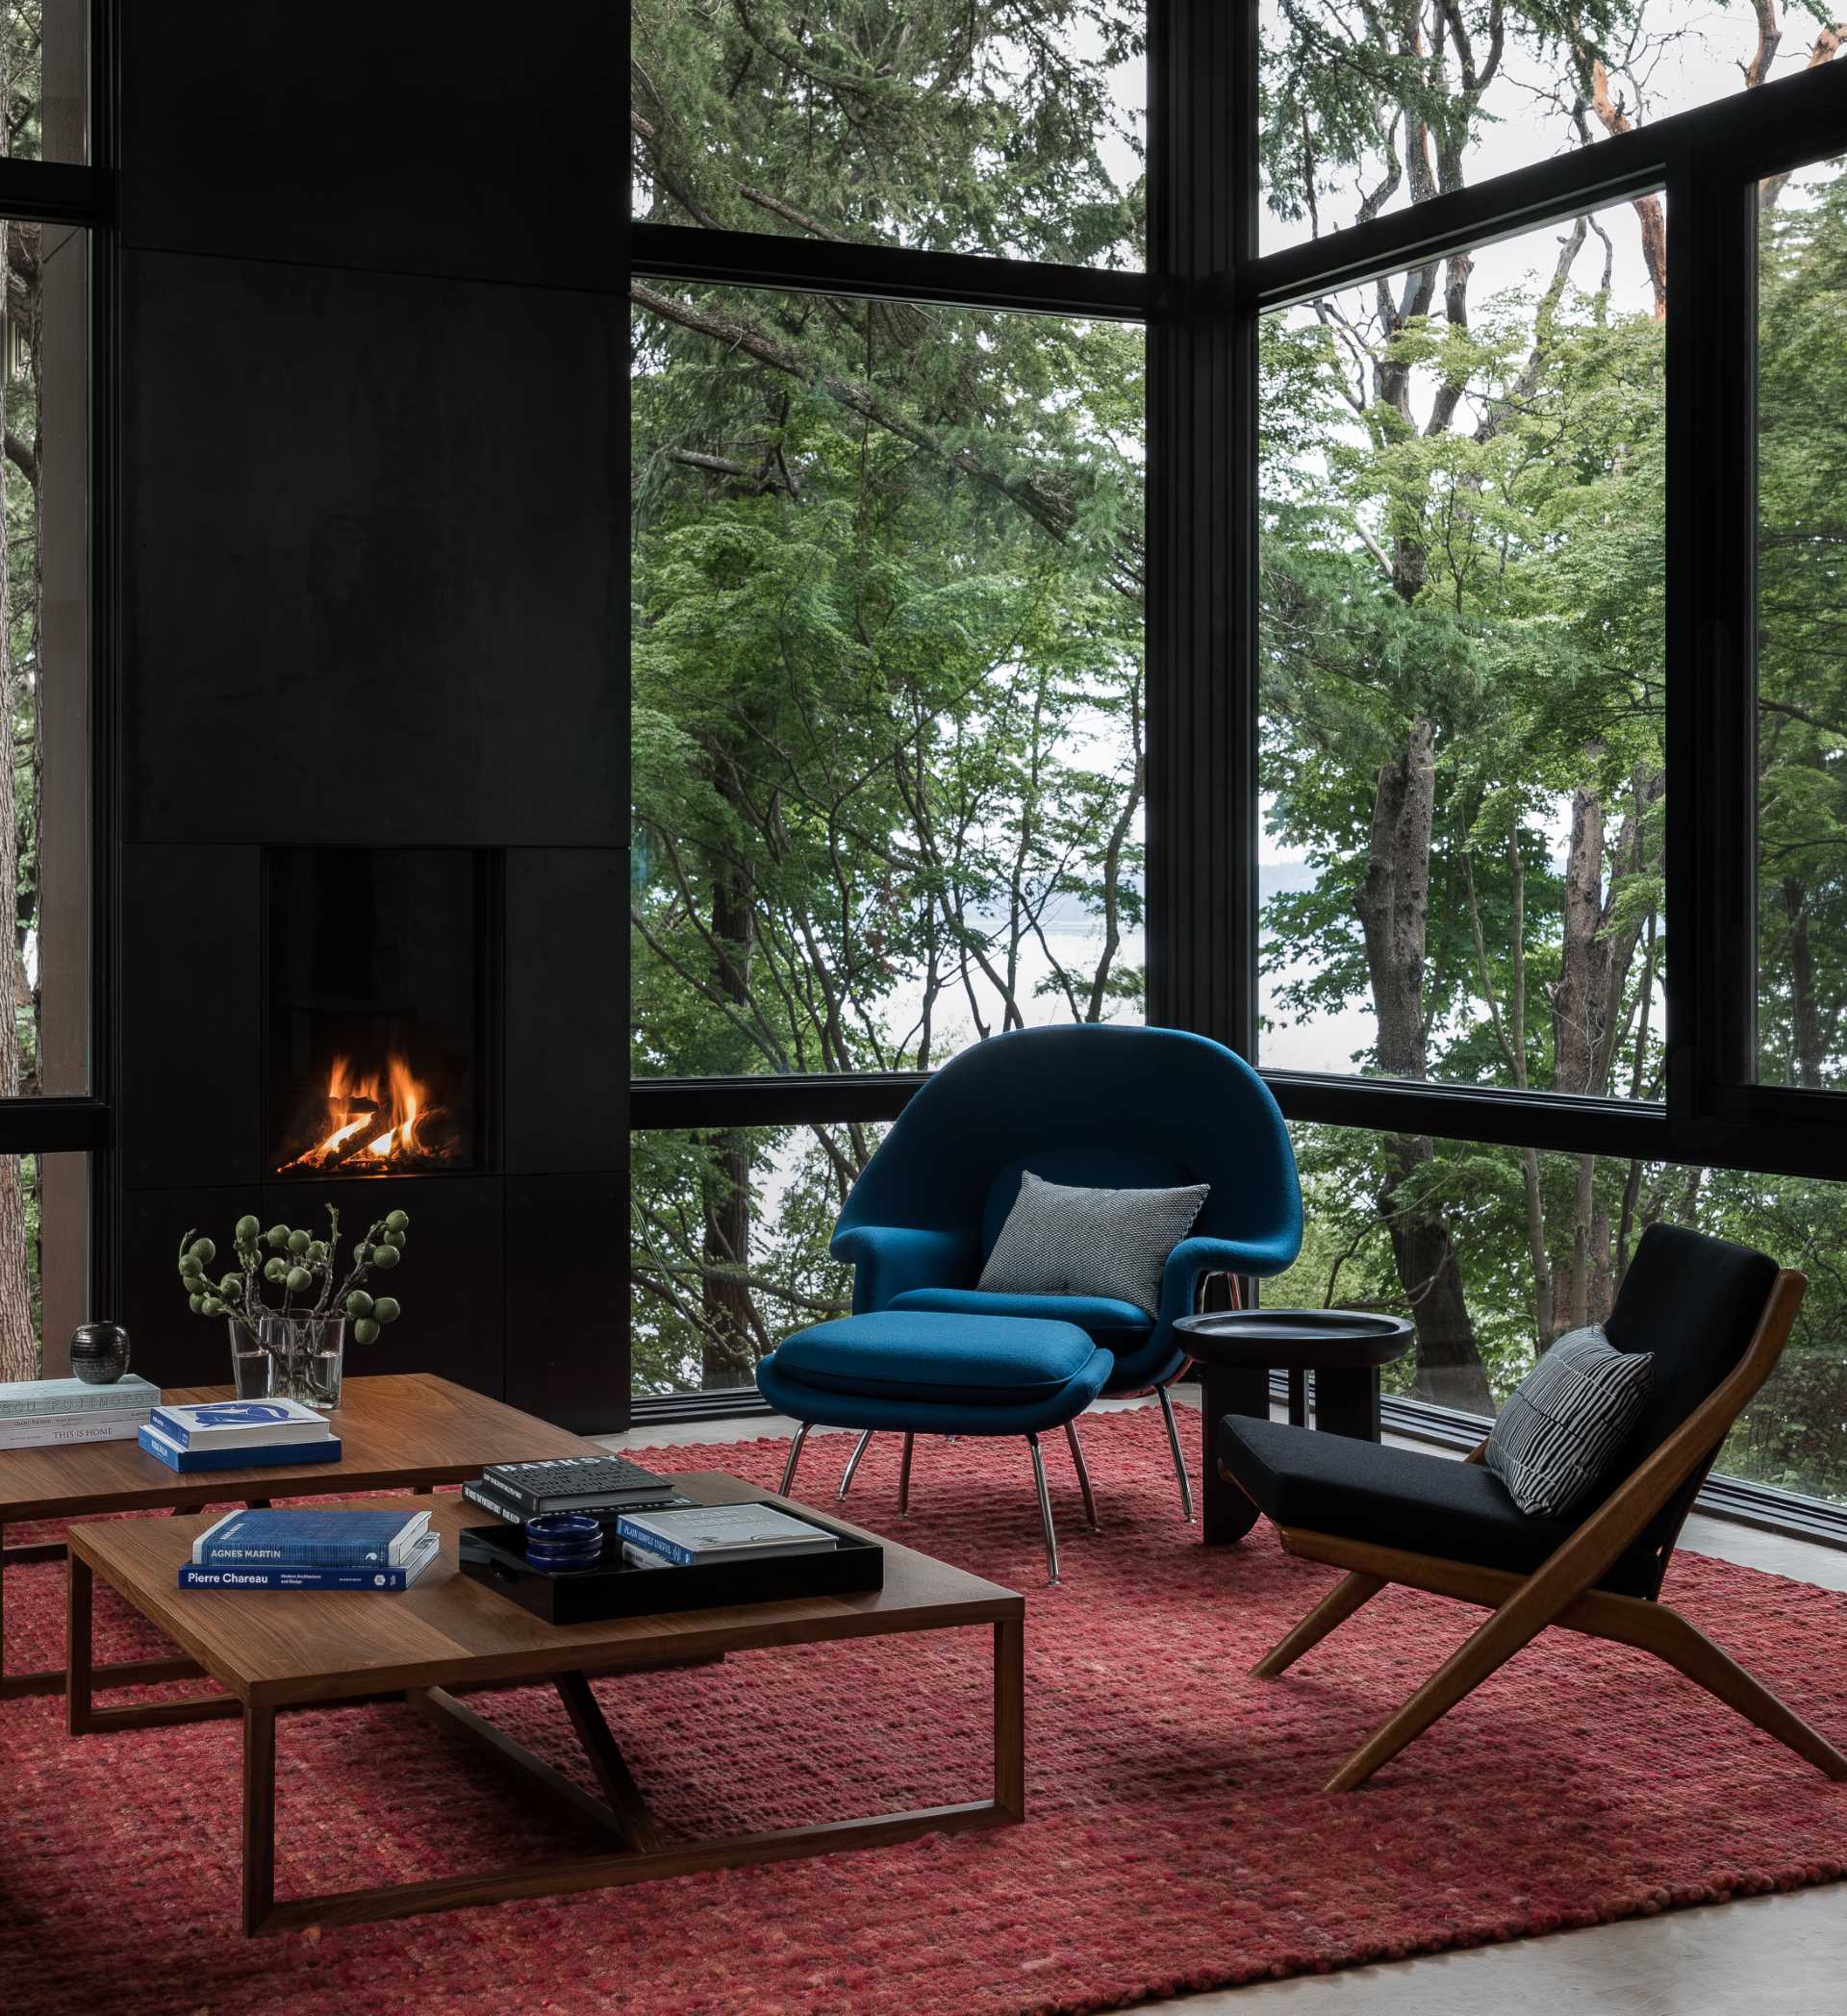 A floating living room extends away from the ،me and is surrounded by tree and water views. A fireplace adds a sense of warmth, while colors add vi،ncy to the ،e.